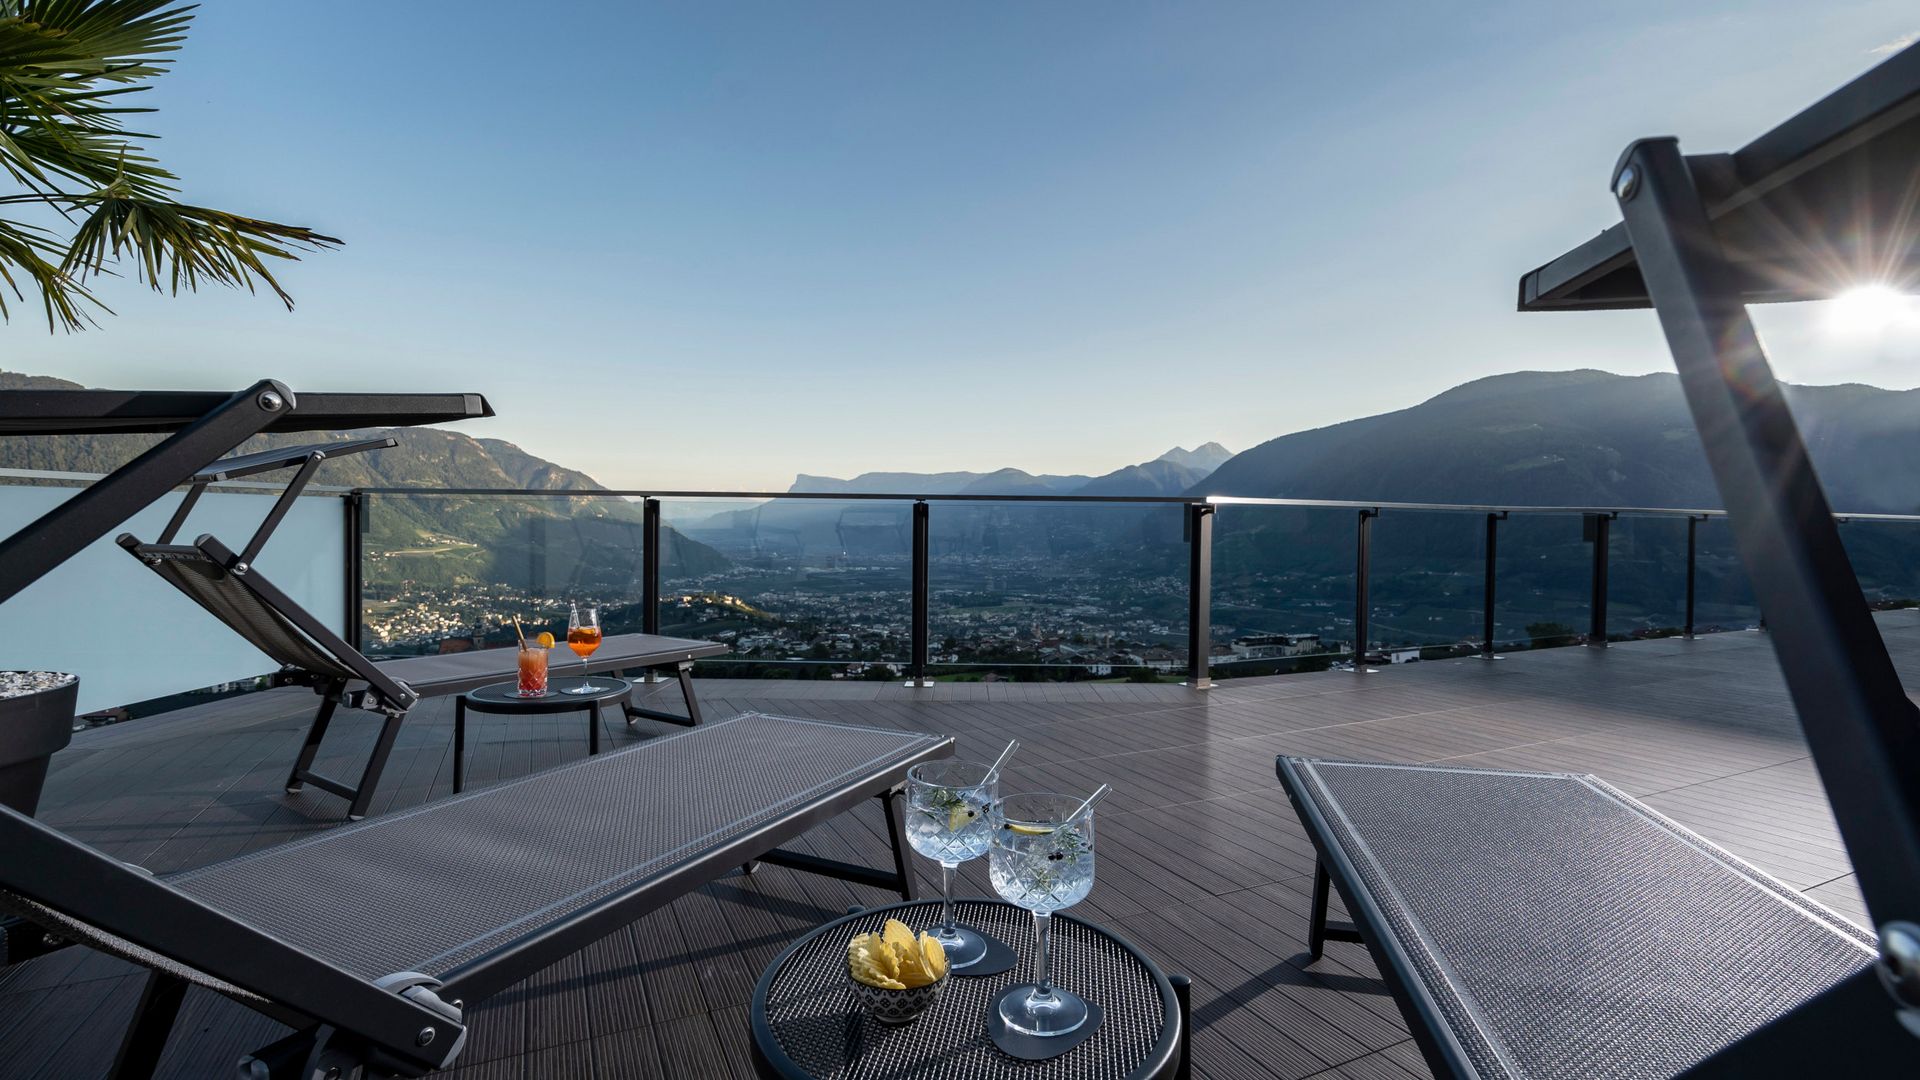 Terrace Loungers Relax Panoramic View Merano Valle dell'Adige Hotel Lechner